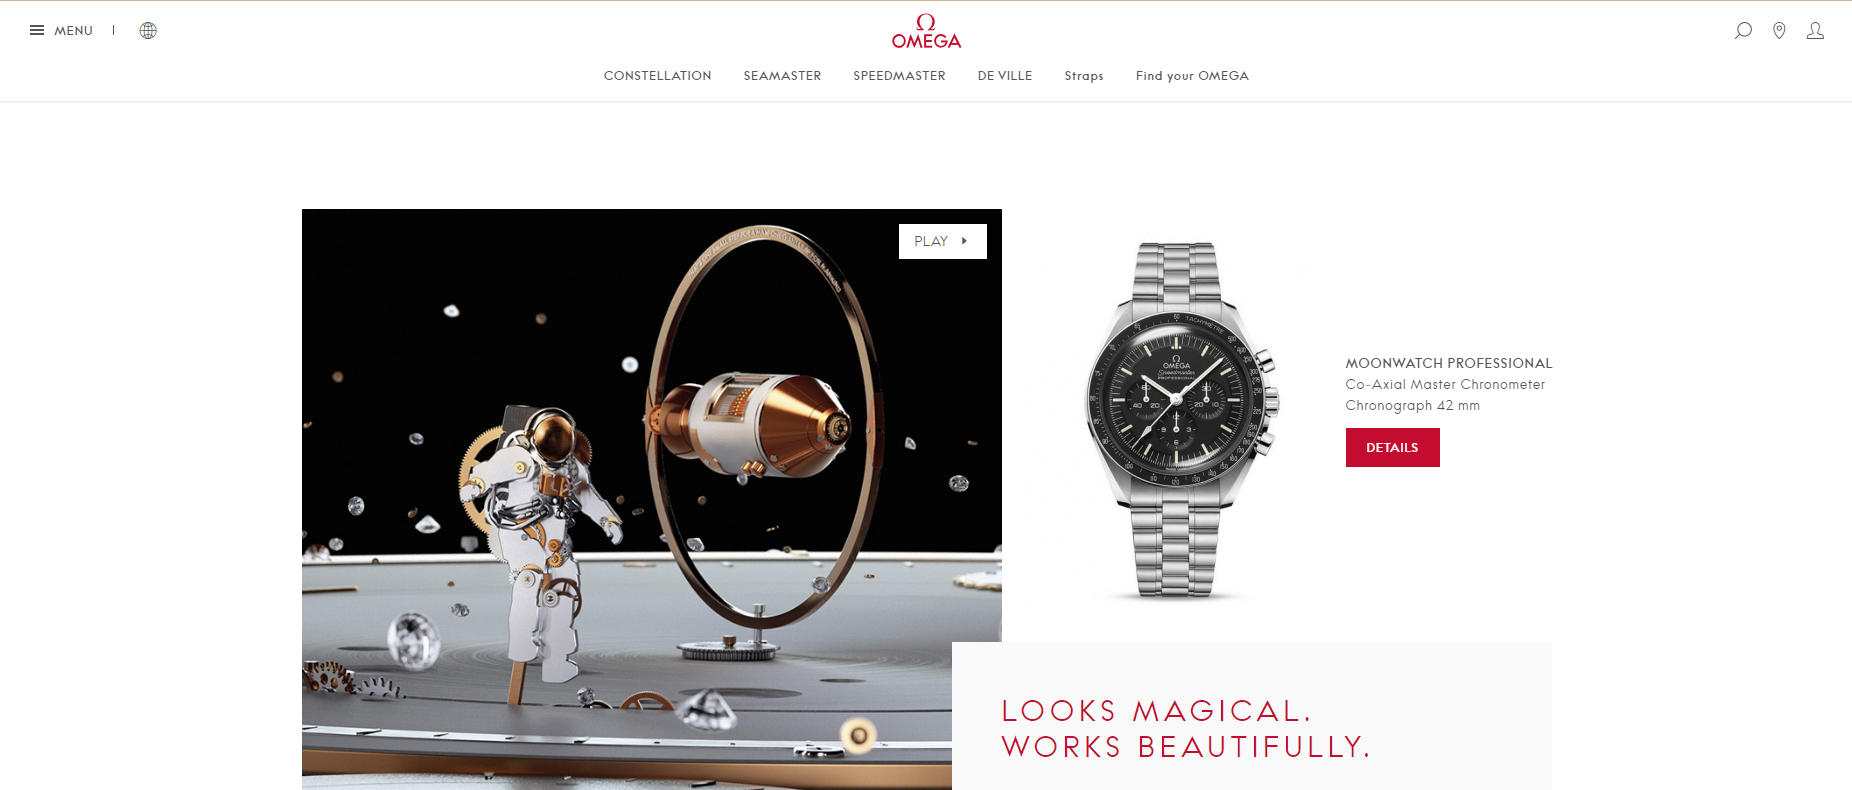 Omega Watches is one of the most popular Magento websites today